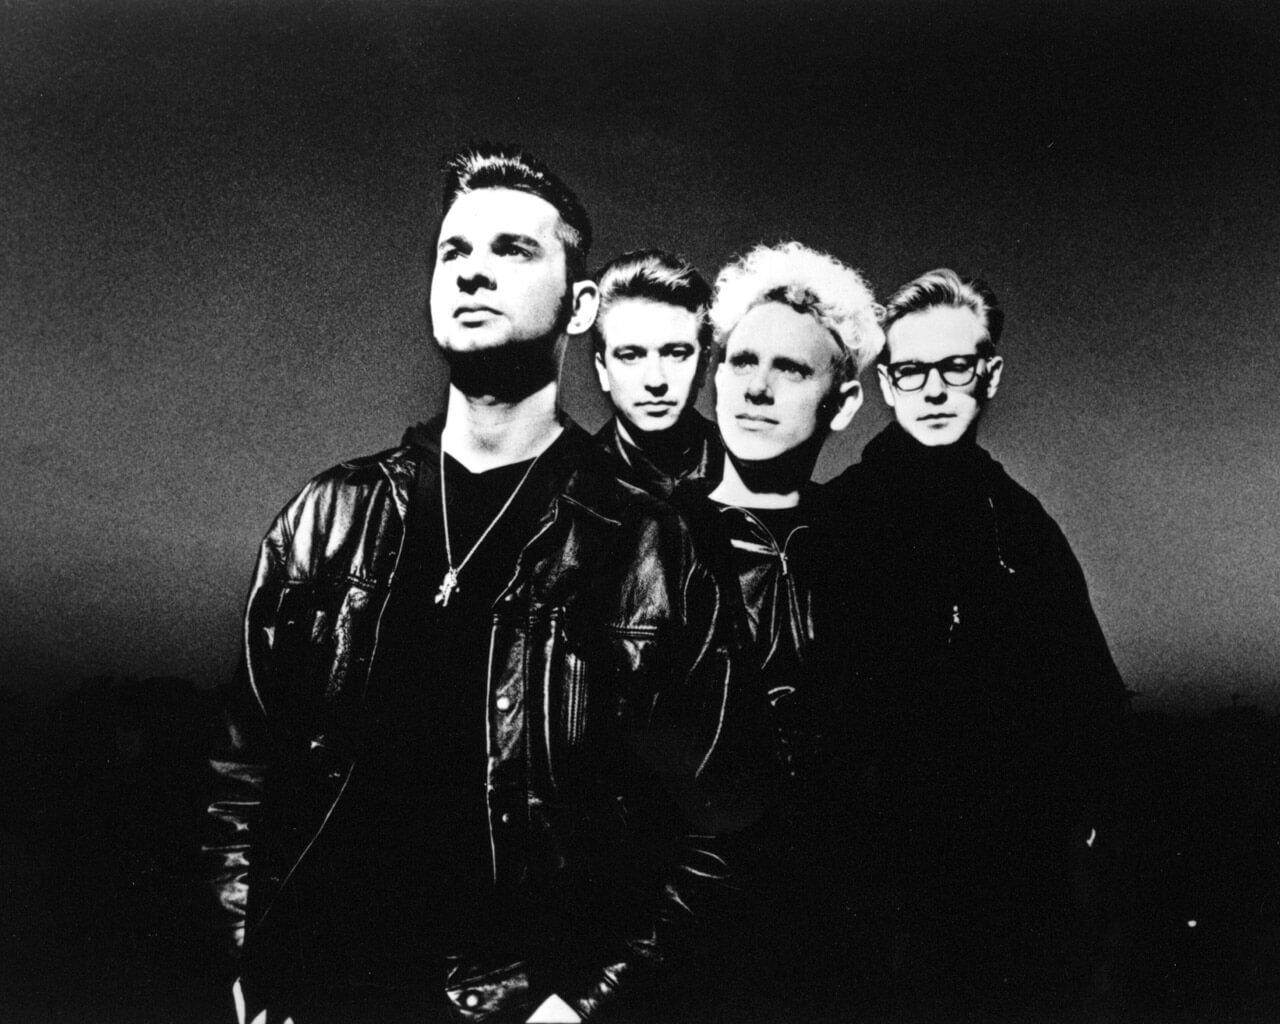 Depeche Mode ... Synth gods, according to Stefan.